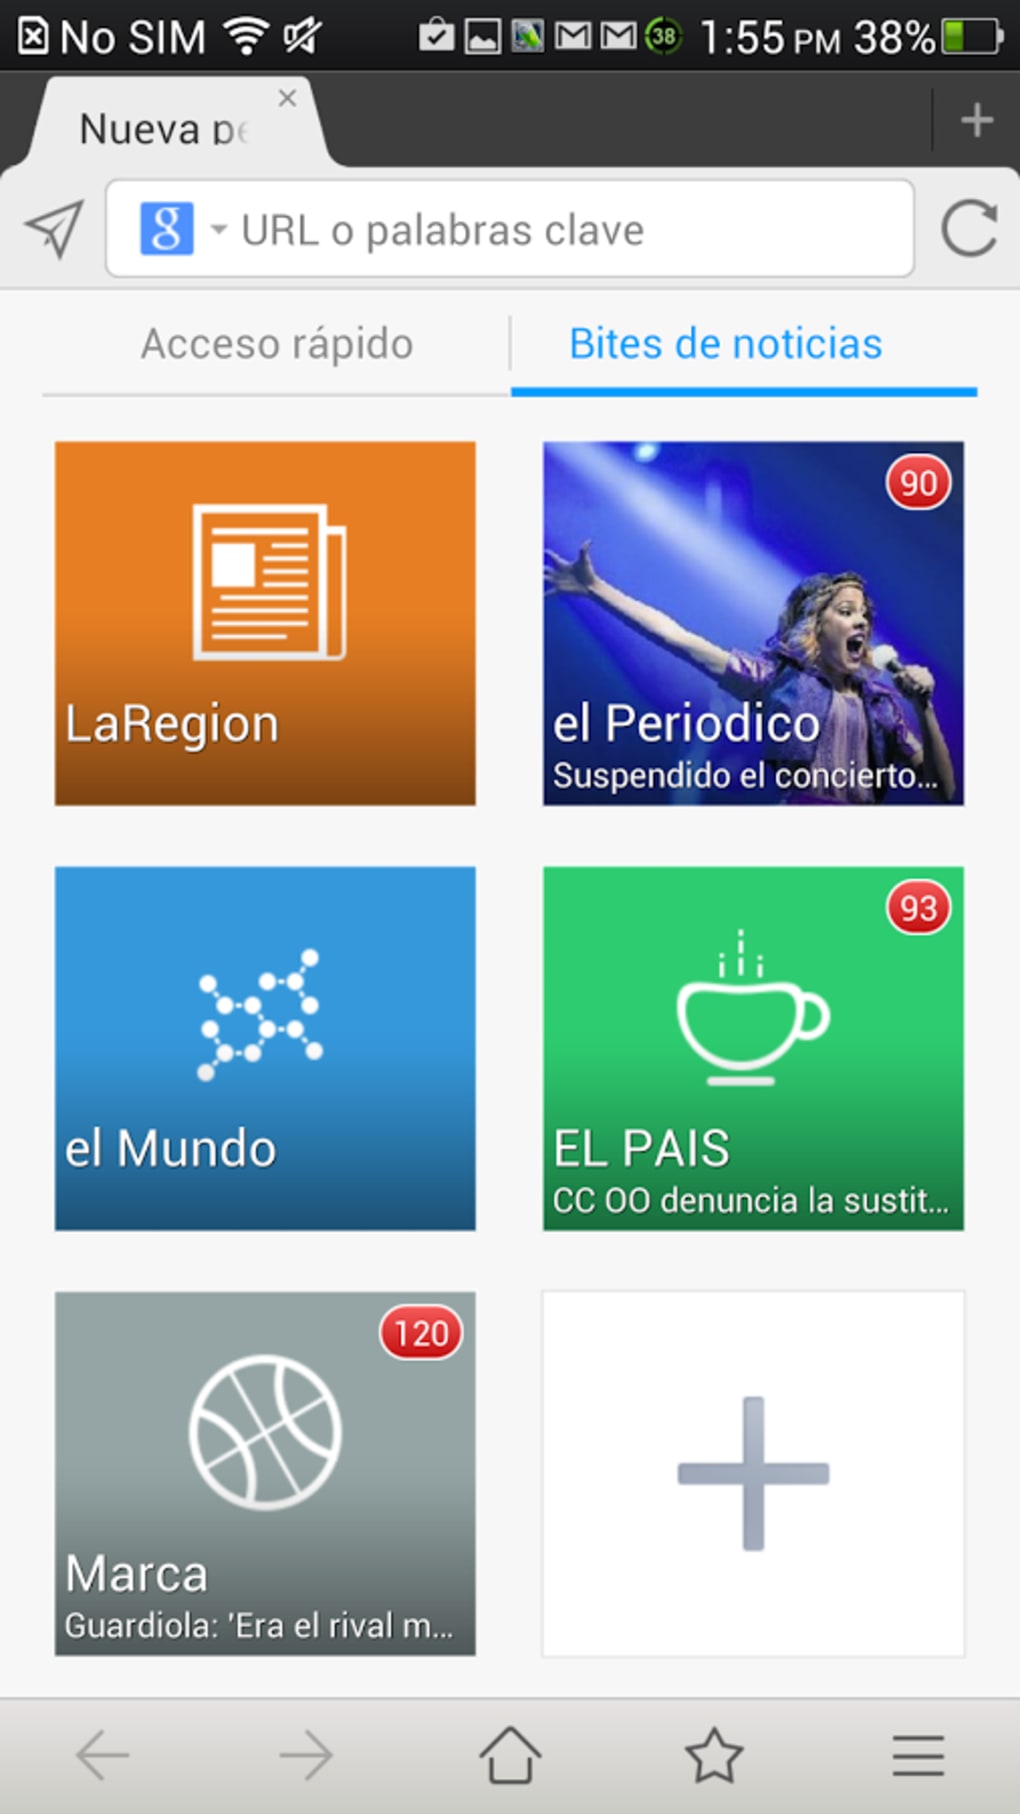 free download maxthon browser for android